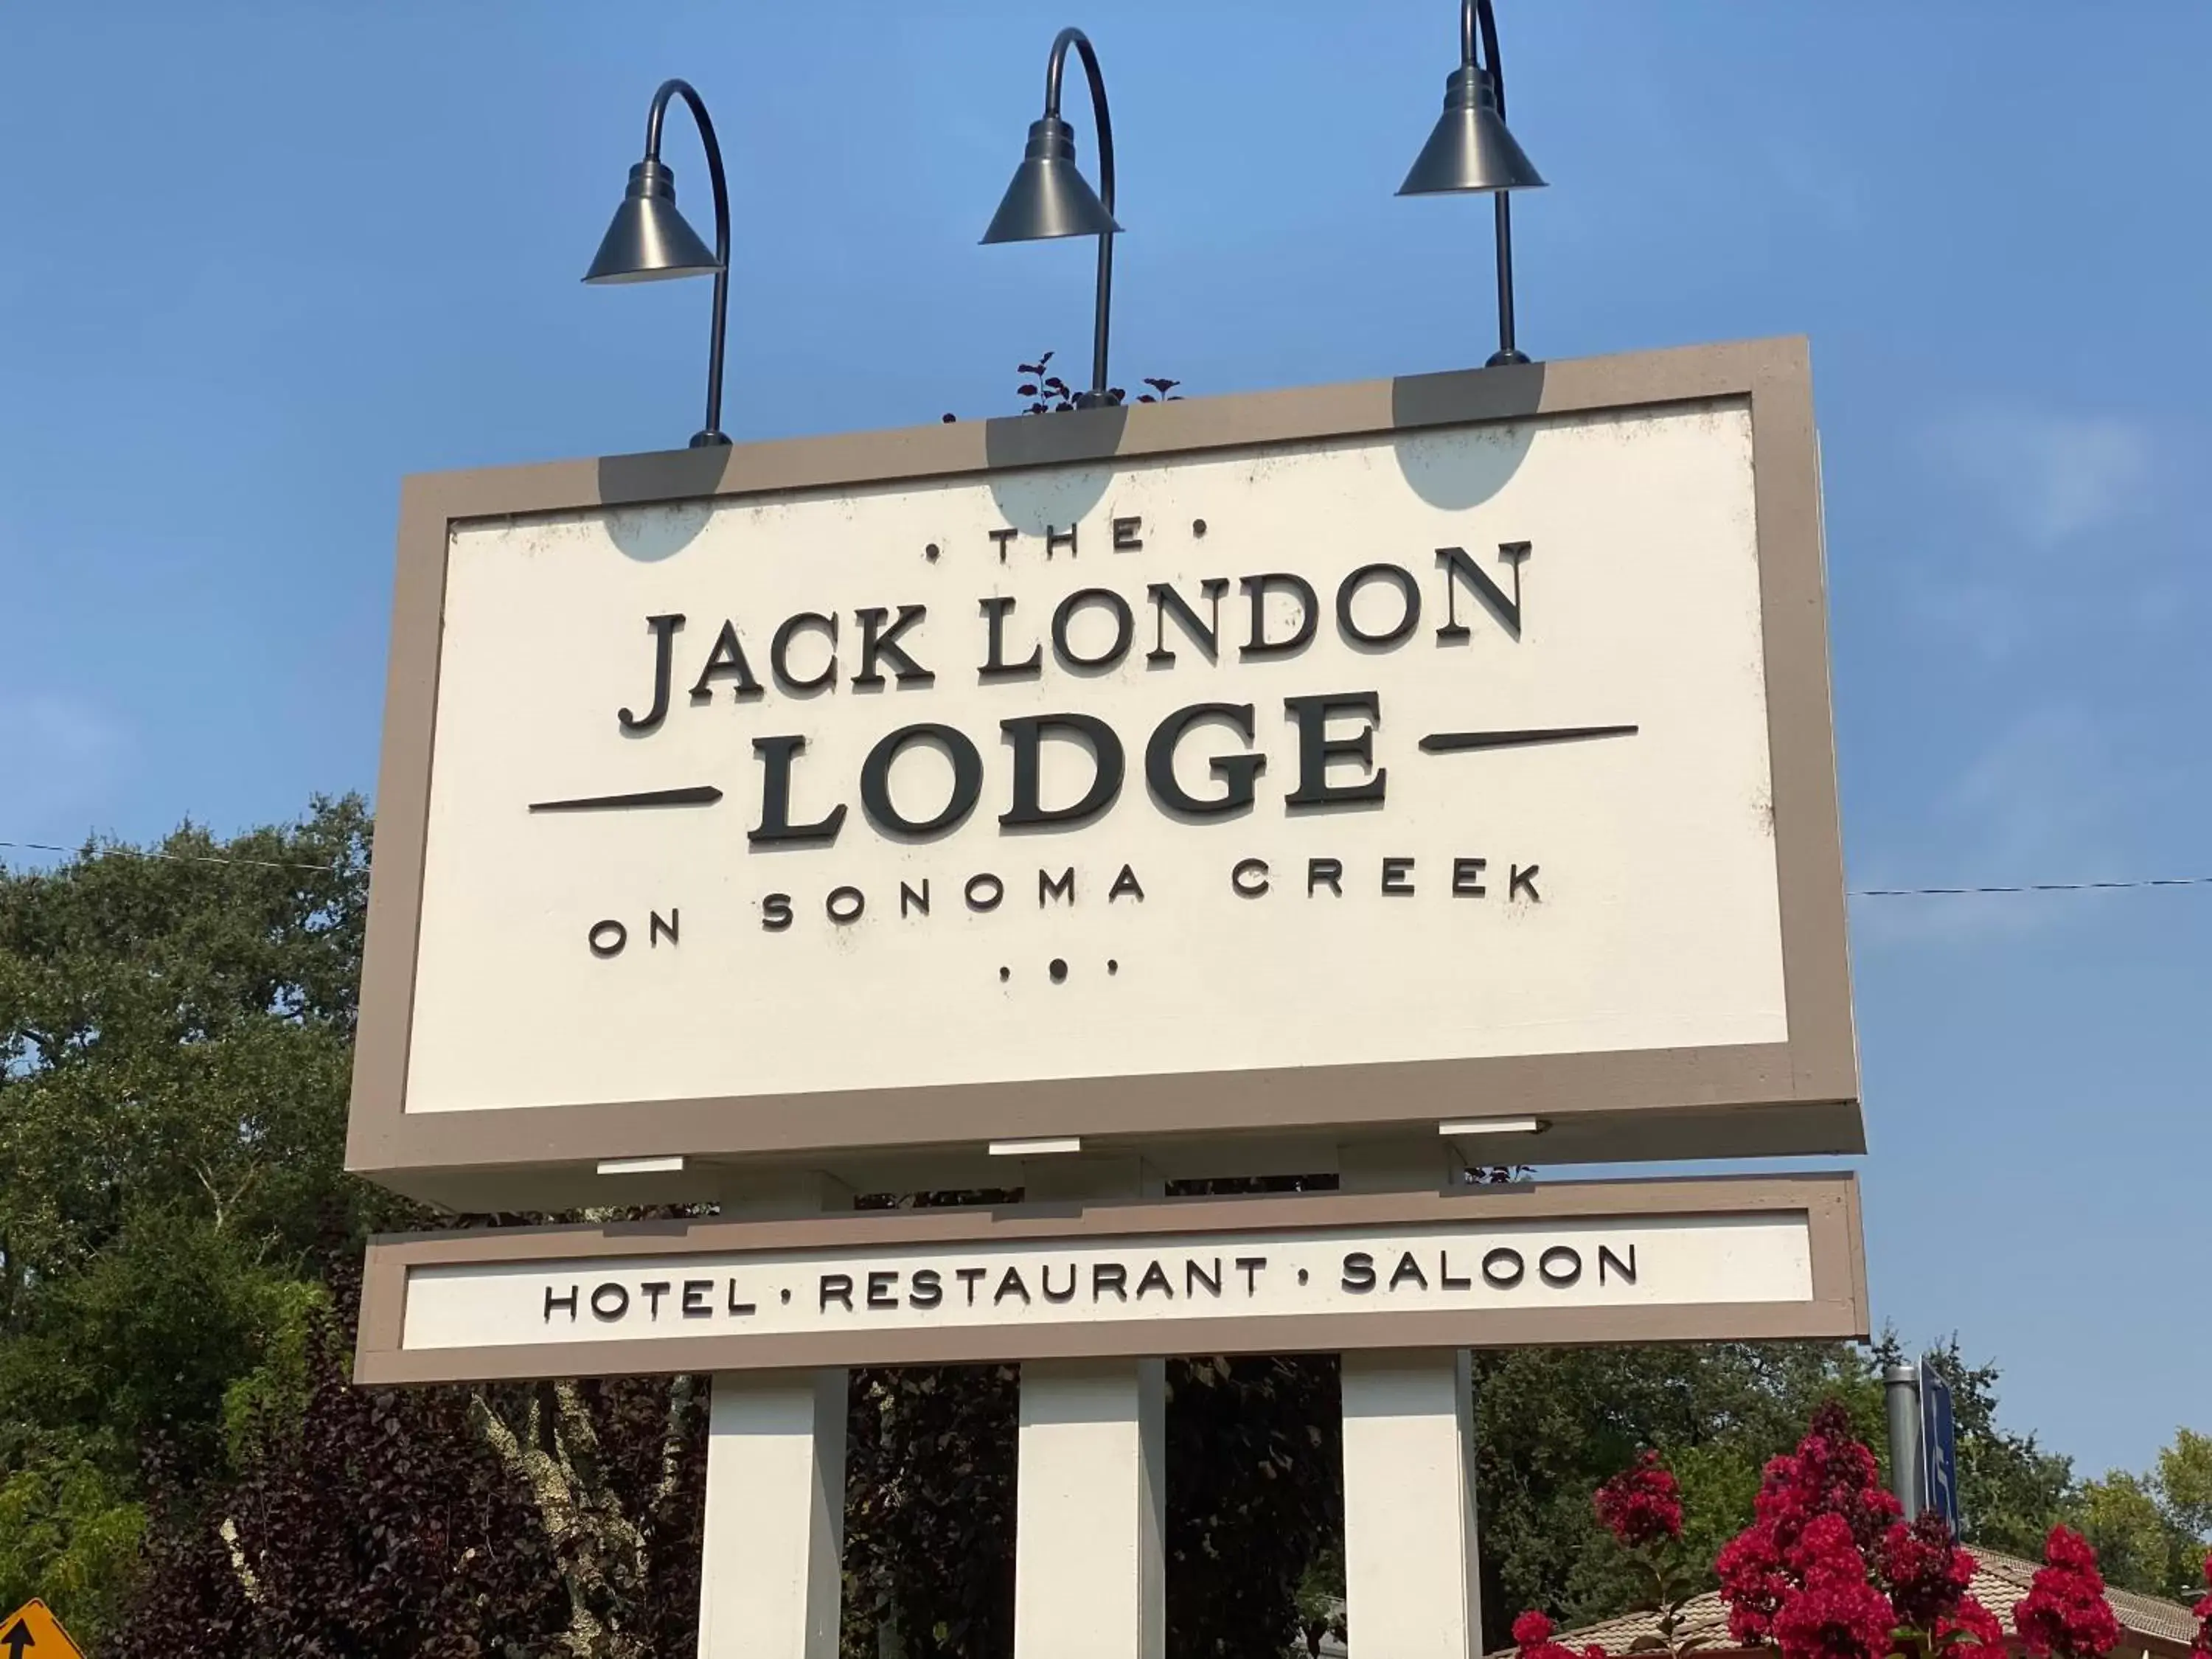 Facade/entrance in The Jack London Lodge